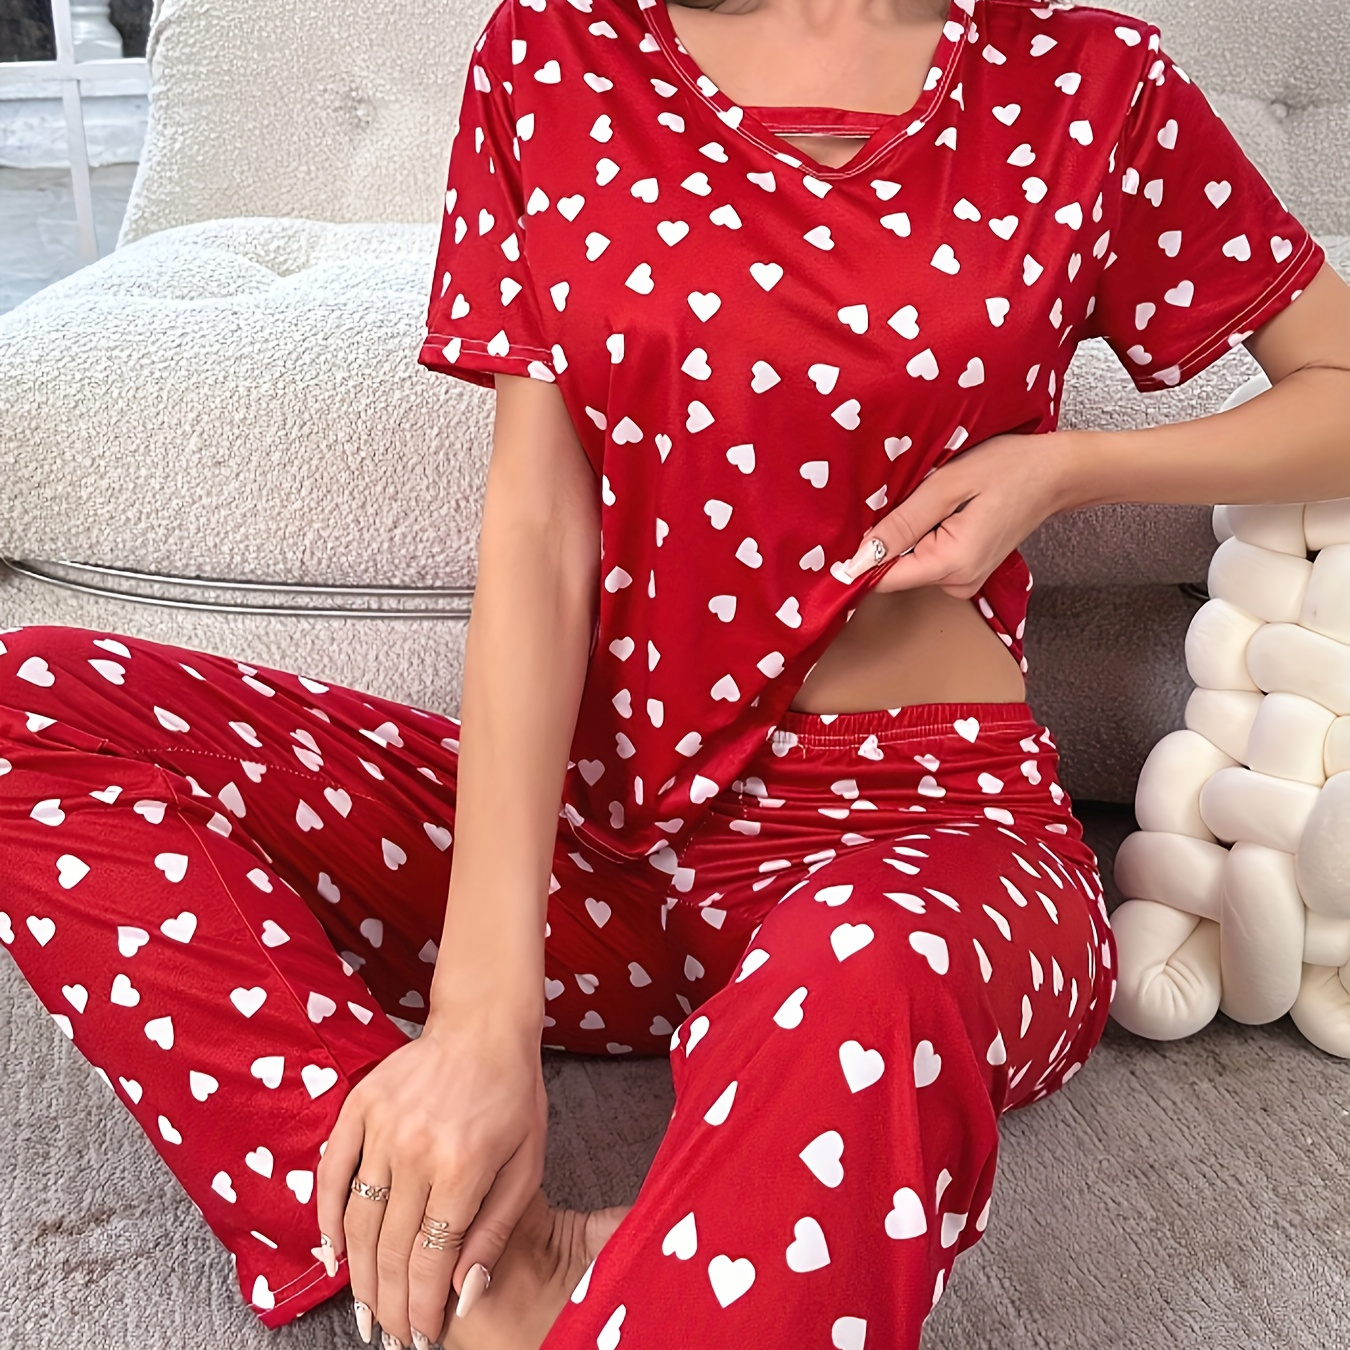 

Women's Heart Print Casual Pajama Set, Short Sleeve Round Neck Top & Pants, Comfortable Relaxed Fit